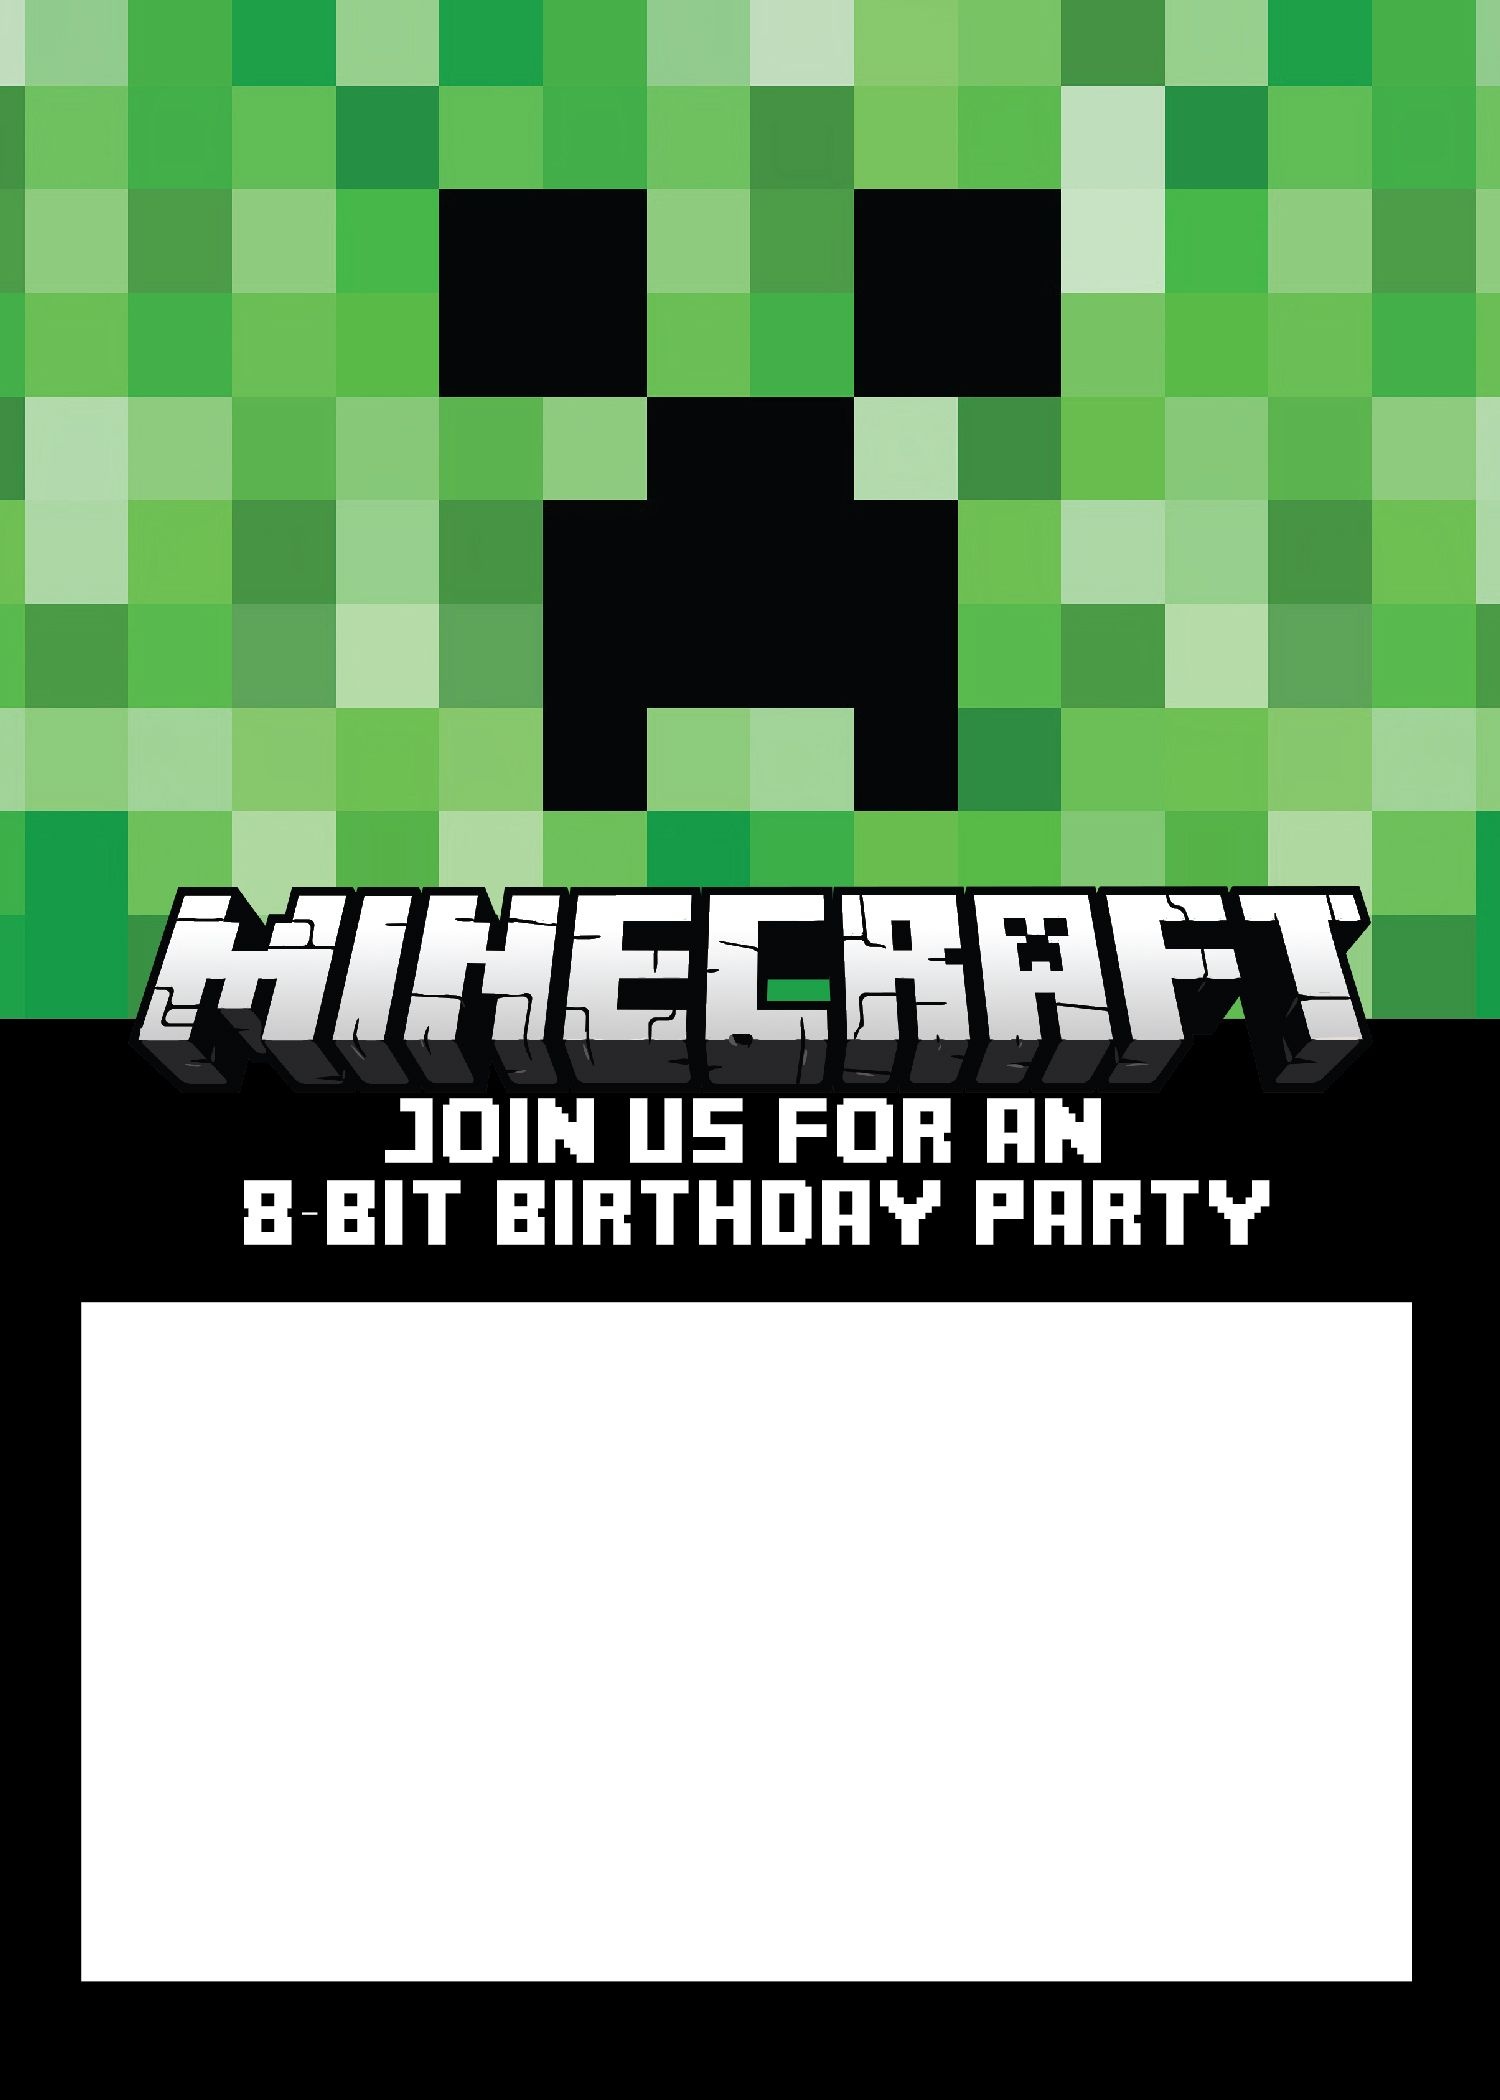 Free Minecraft Invitations For Print Or Evite! | Minecraft - Free Printable Minecraft Invitations